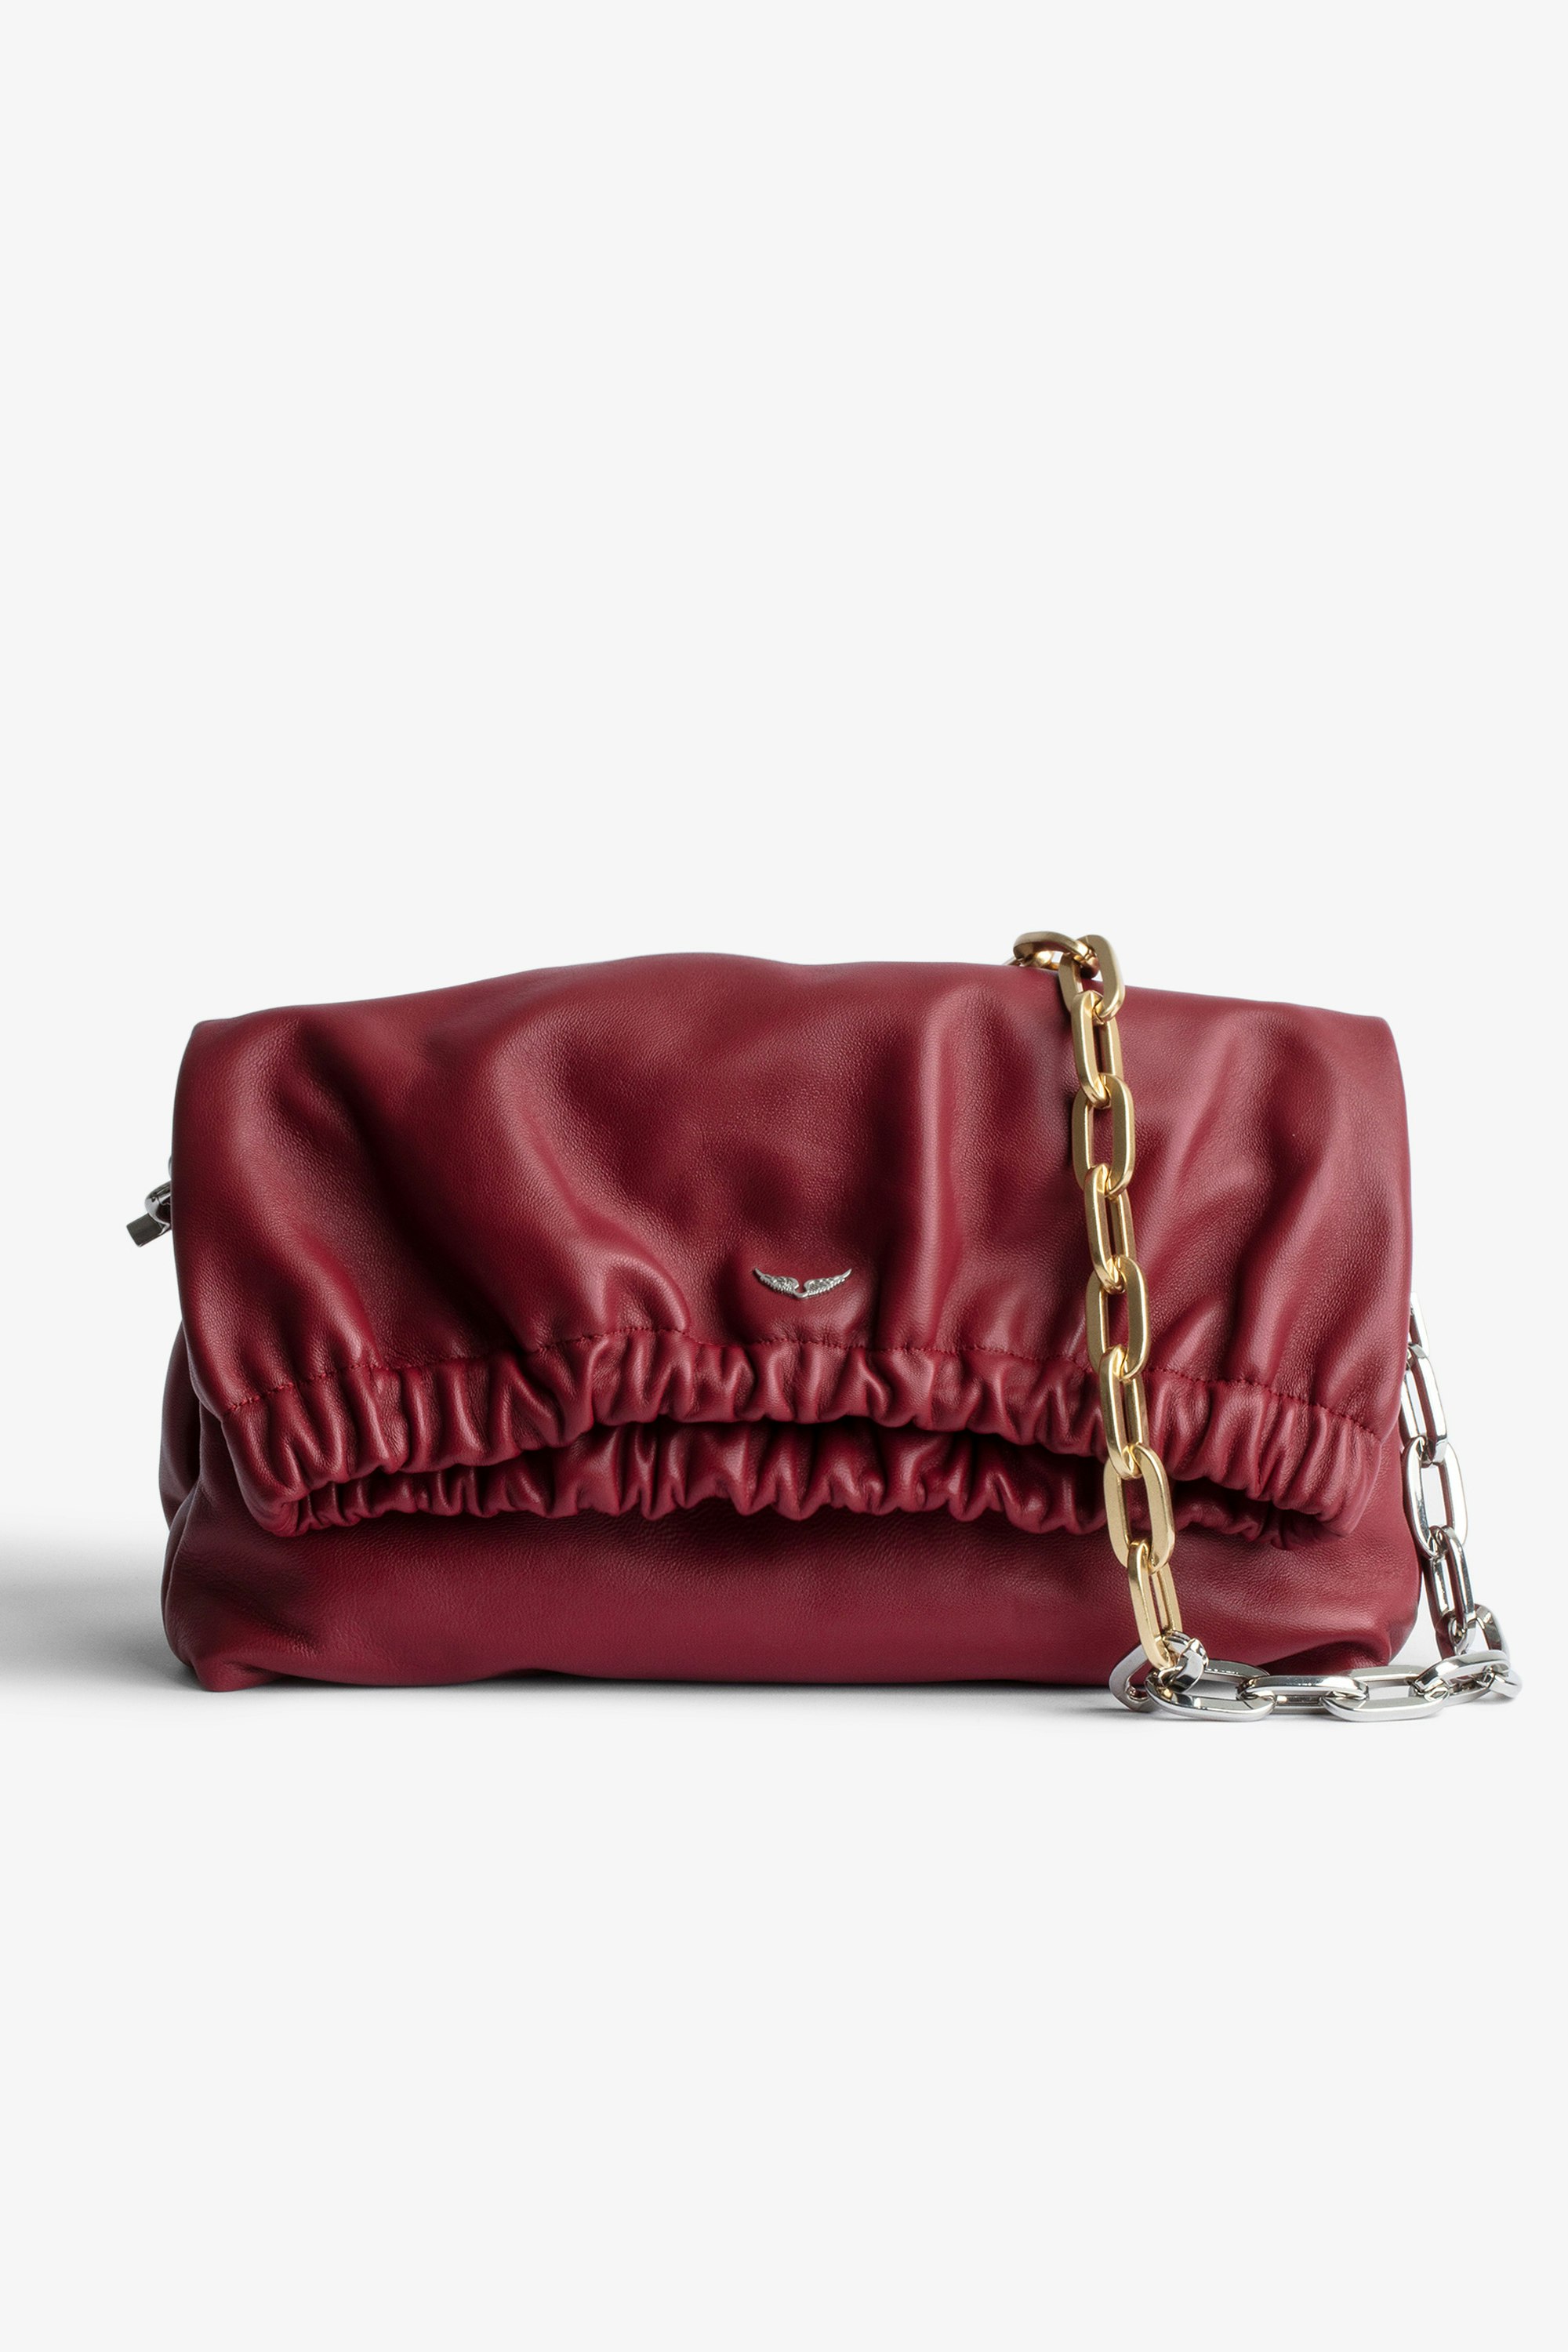 Rockyssime バッグ Women’s clutch bag in red smooth leather with two-tone metal chain